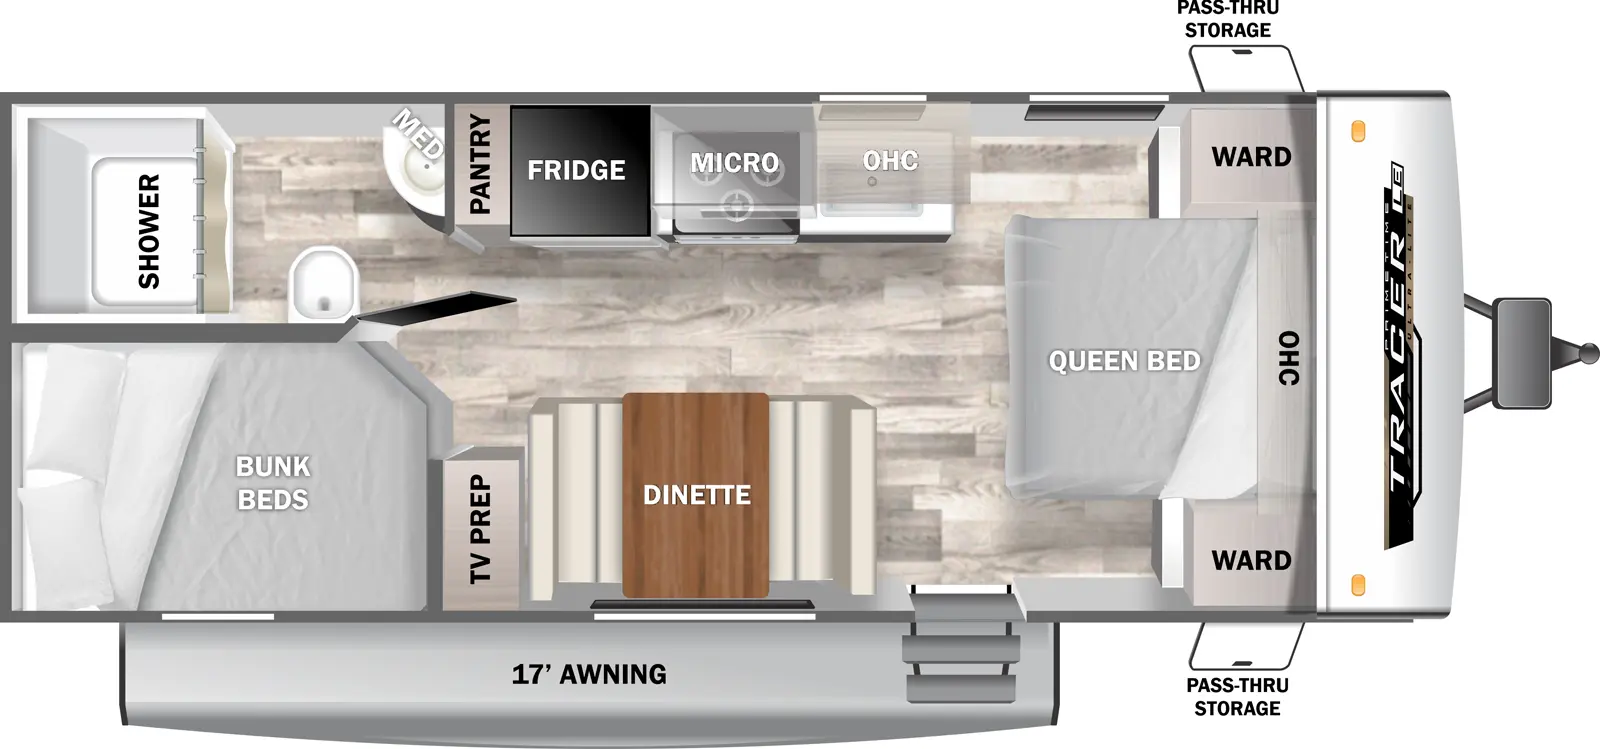 The 200BHSLE has zero slideouts and one entry. Exterior features a 17 foot awning. Interior layout front to back: foot-facing queen bed with overhead cabinet and wardrobes on each side; off-door side kitchen counter with sink, cooktop, overhead cabinet, microwave, refrigerator, and pantry; door side entry, dinette, and TV prep; rear off-door side full bathroom with medicine cabinet; rear door side bunk beds.